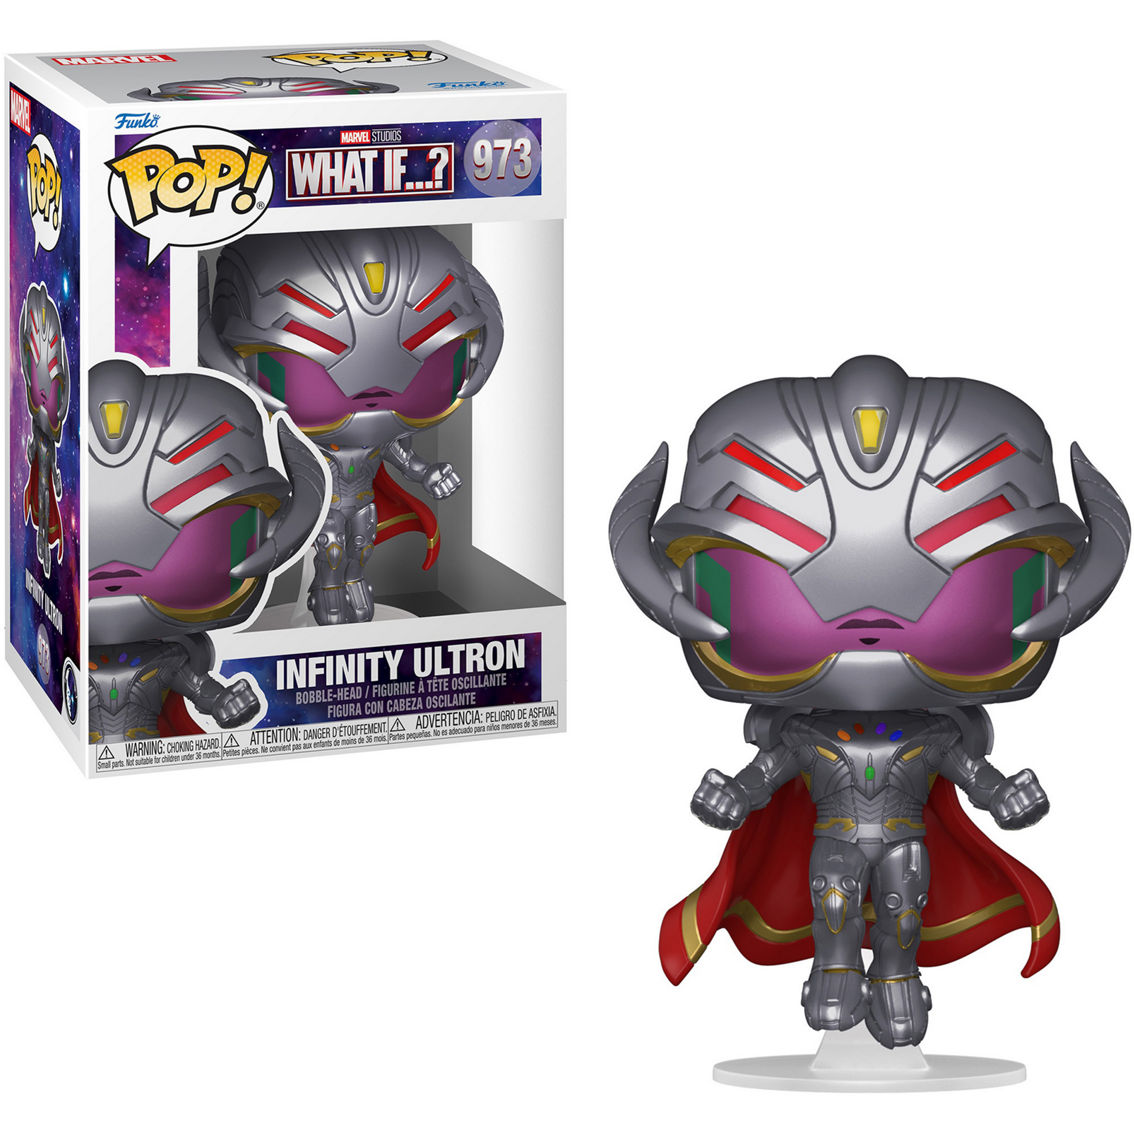 Funko POP! Marvel What If? Infinity Ultron Collectors' Set - Image 3 of 8